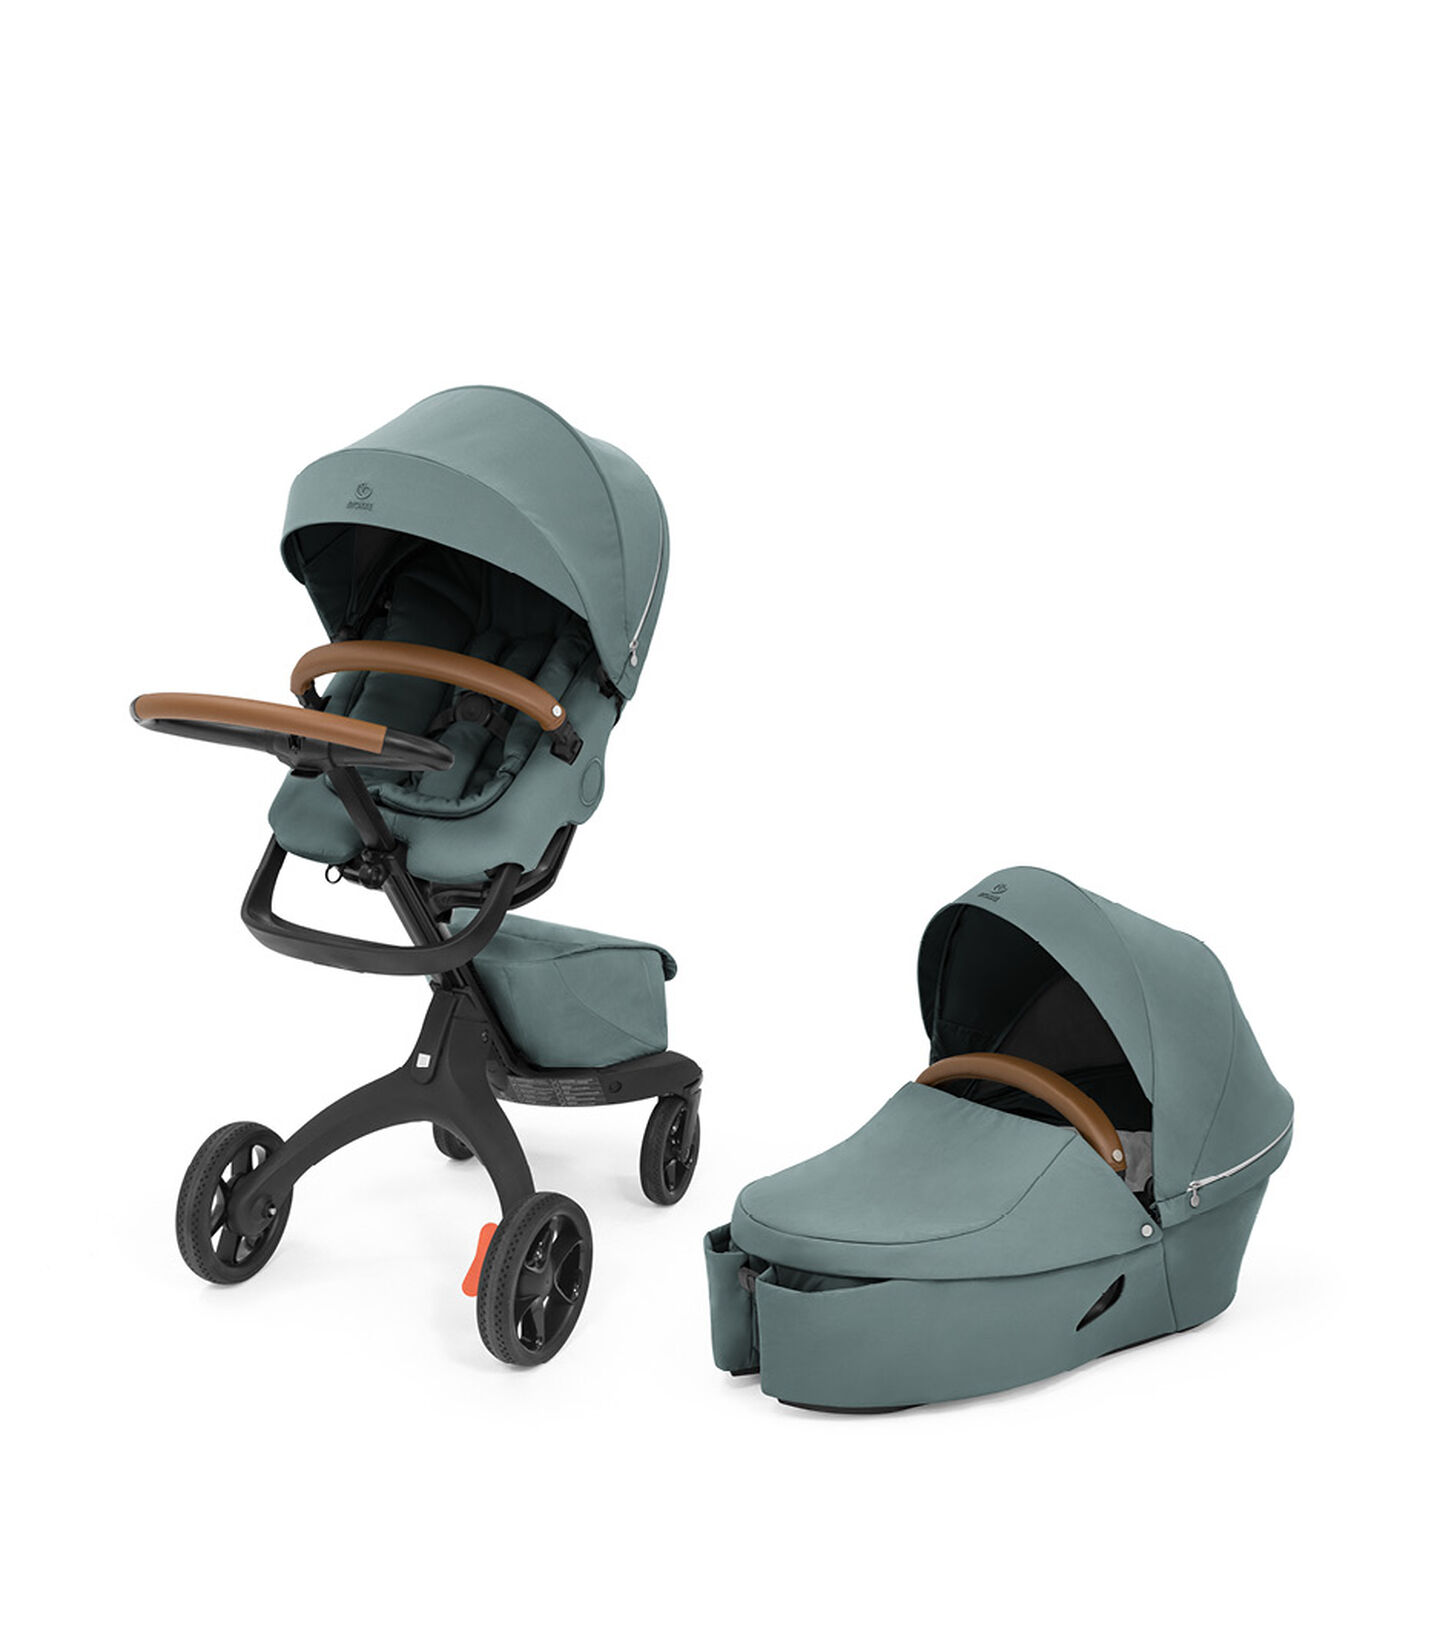 Stokke® Xplory® X Cool Teal, Cool Teal, mainview view 8